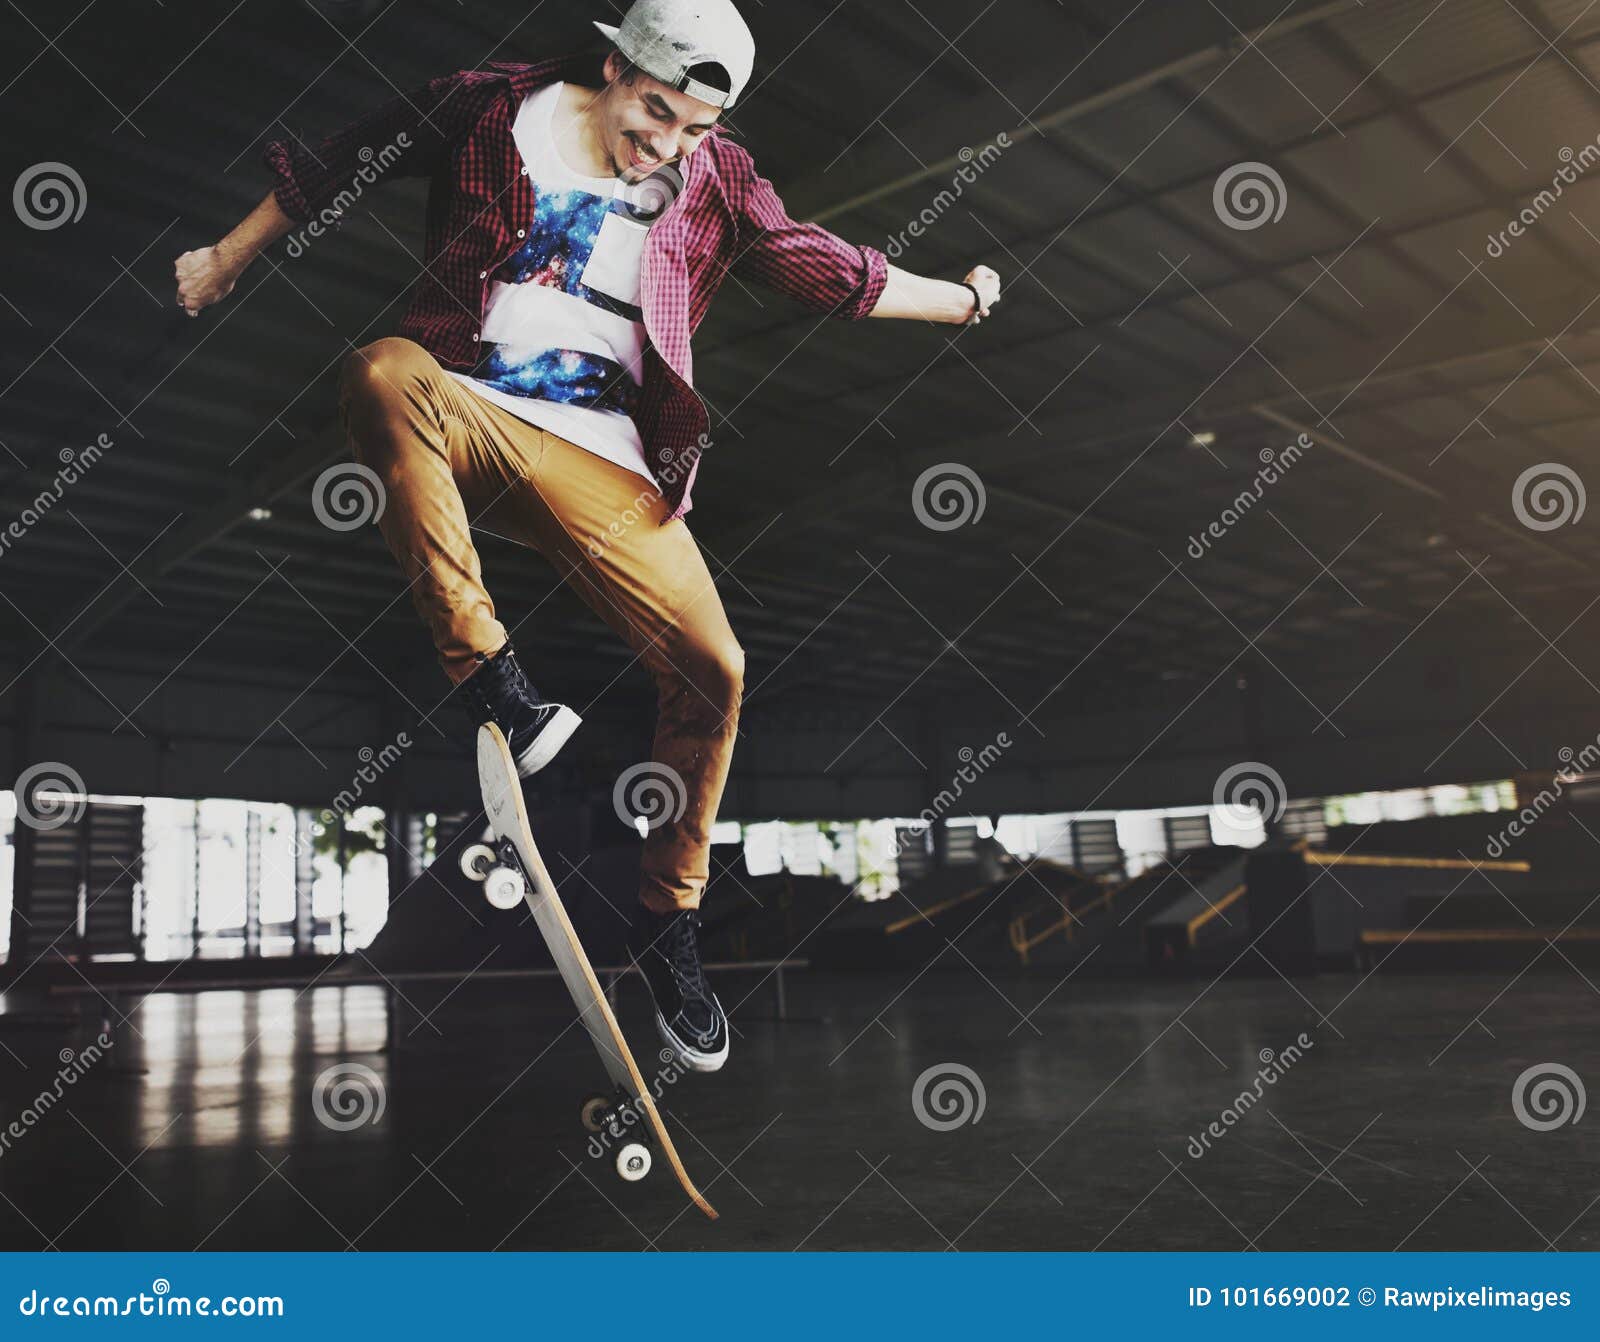 Young Man Jumping on Skateboard Stock Photo - Image of ramp, motion ...